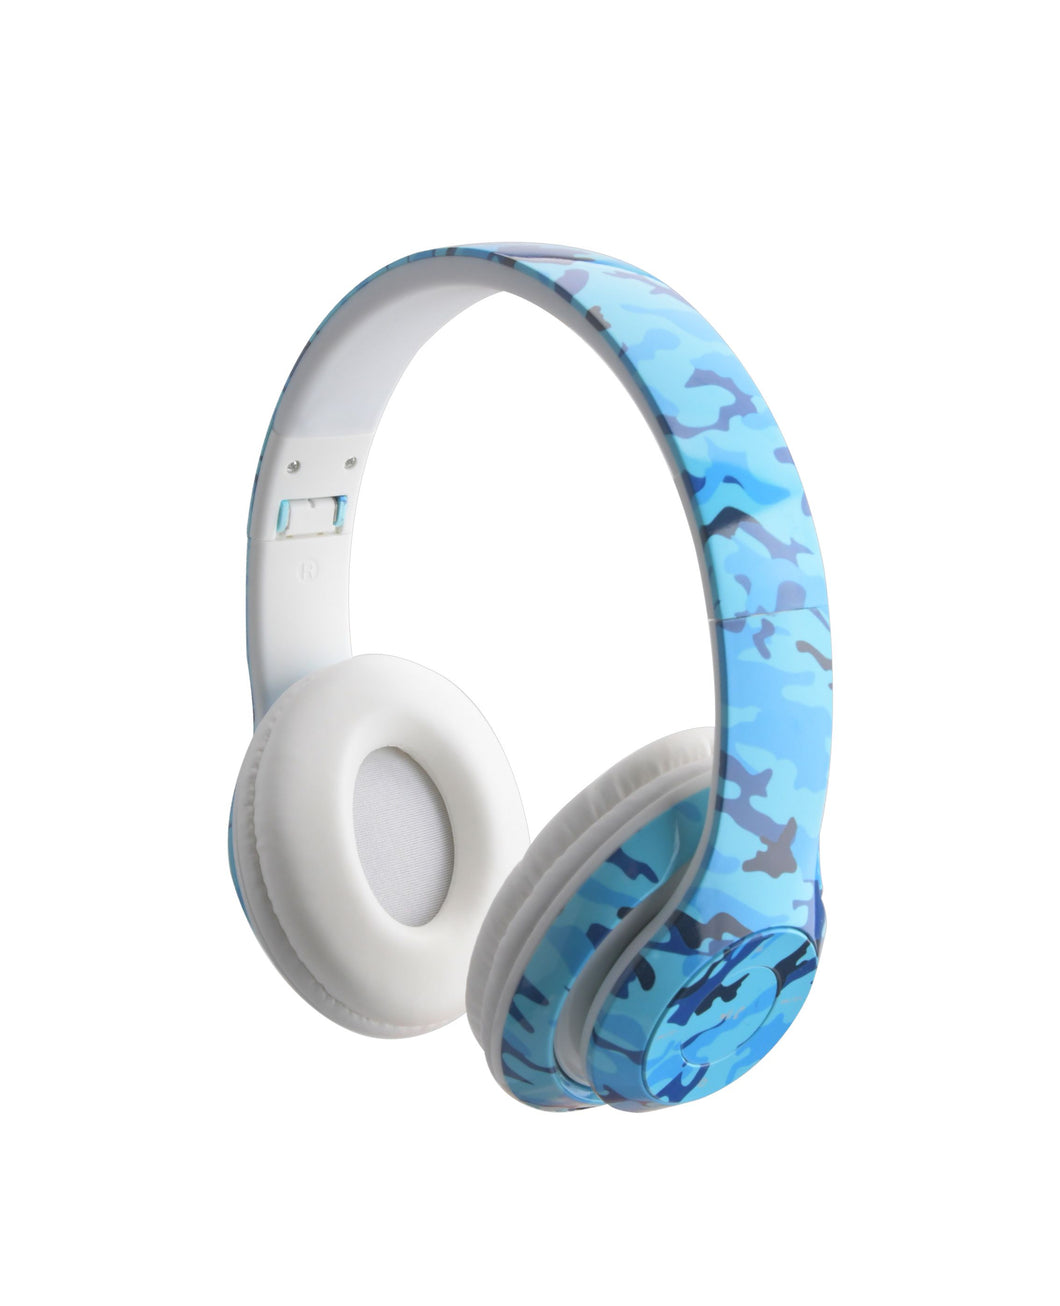 Wireless Express Bluetooth Headphones - Foldable Bluetooth Headset - Lightweight Headphones - Adjustable On-Ear Headphones - Fashion Bluetooth Headphones with Microphone (Blue Camo)